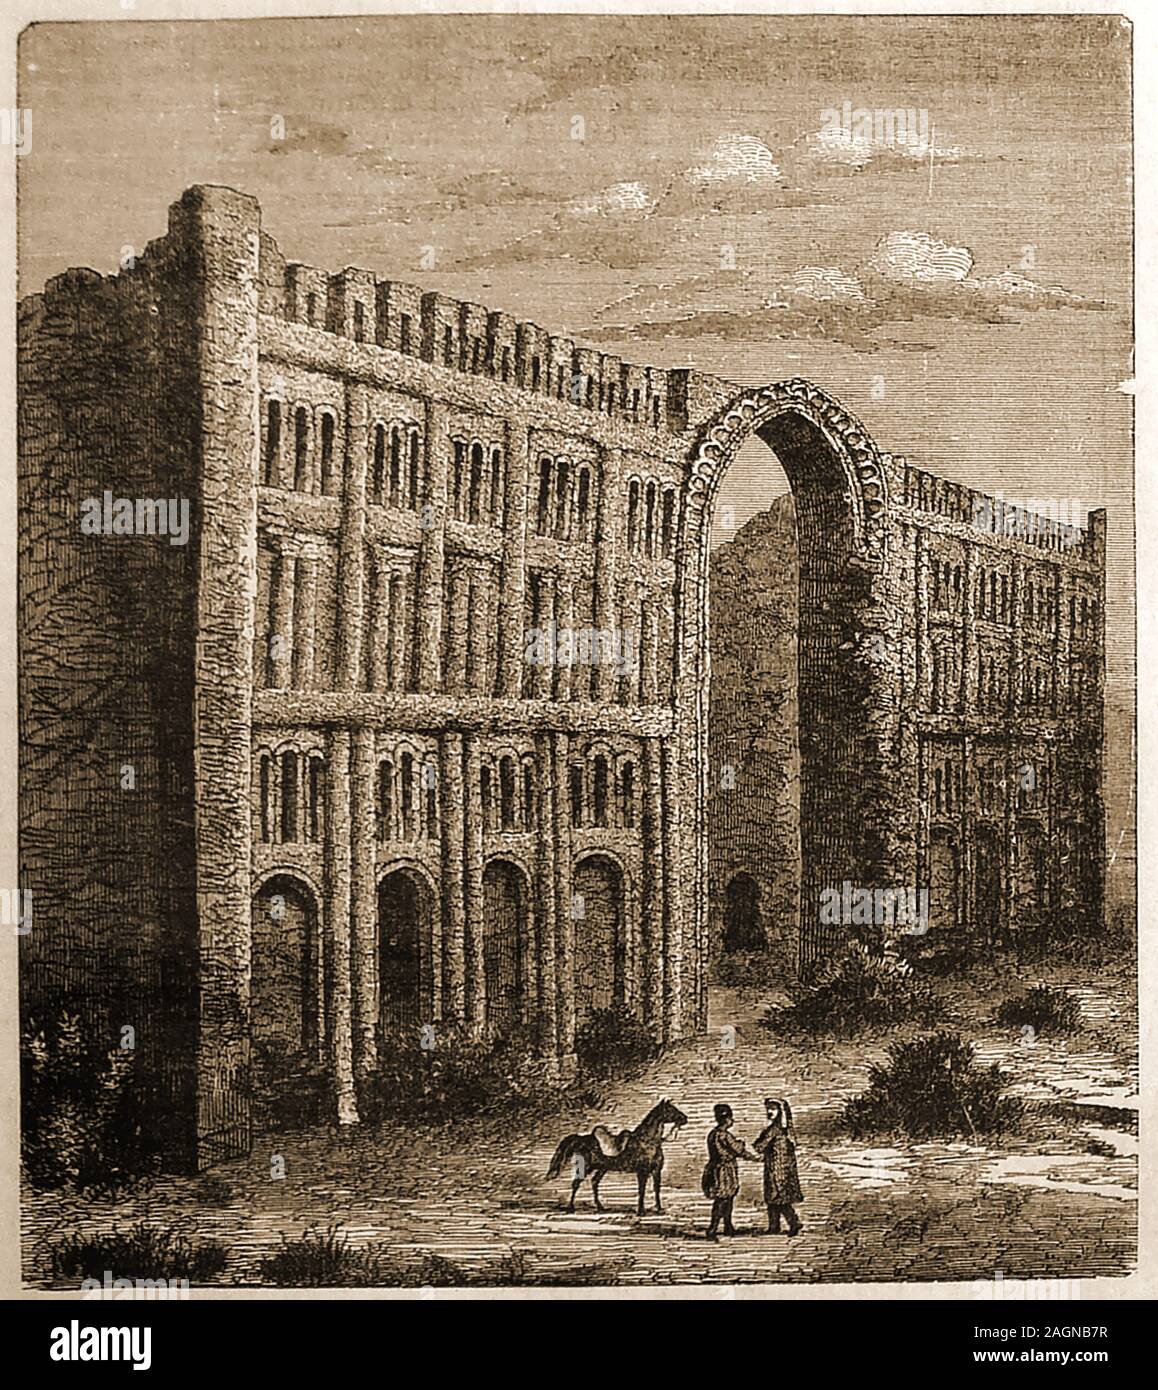 A 19th century engraving showing El Kase (aka  Kasr, The Castle or Palace ) at Babylon Stock Photo